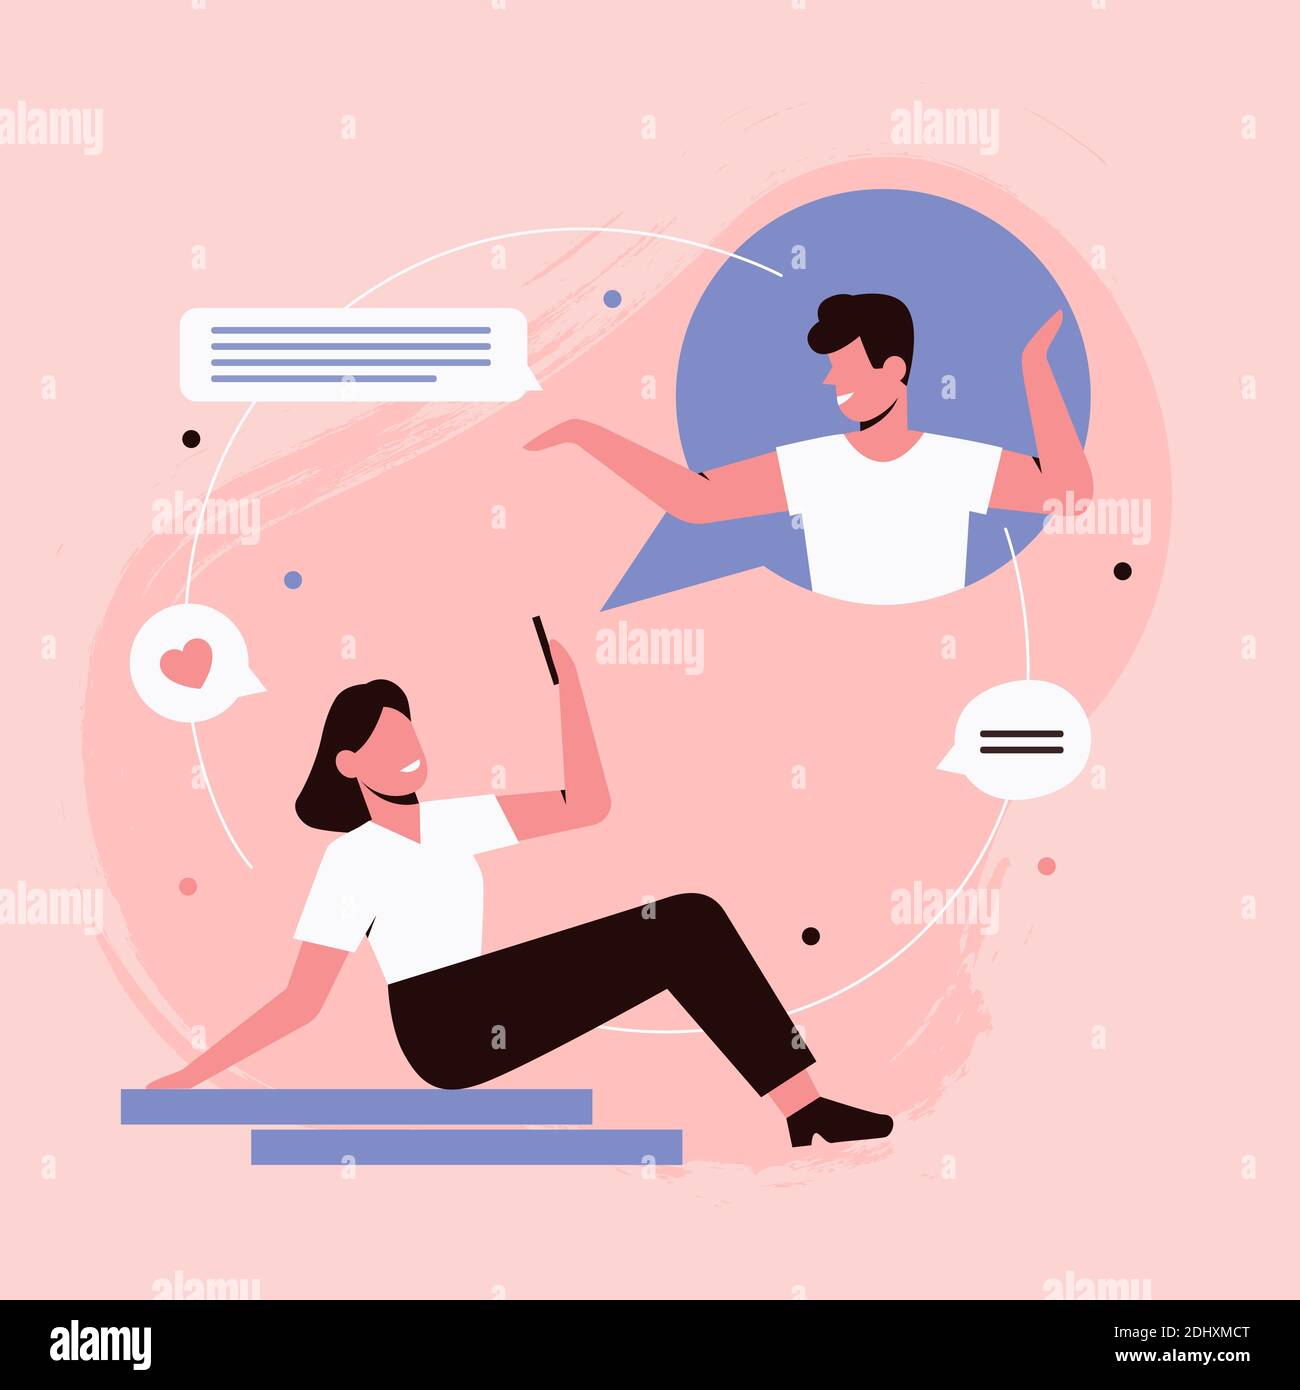 People on date in online chat, internet communication concept vector illustration. Cartoon lover characters chatting in chat bubble, couple communicating, social media virtual conversation background Stock Vector